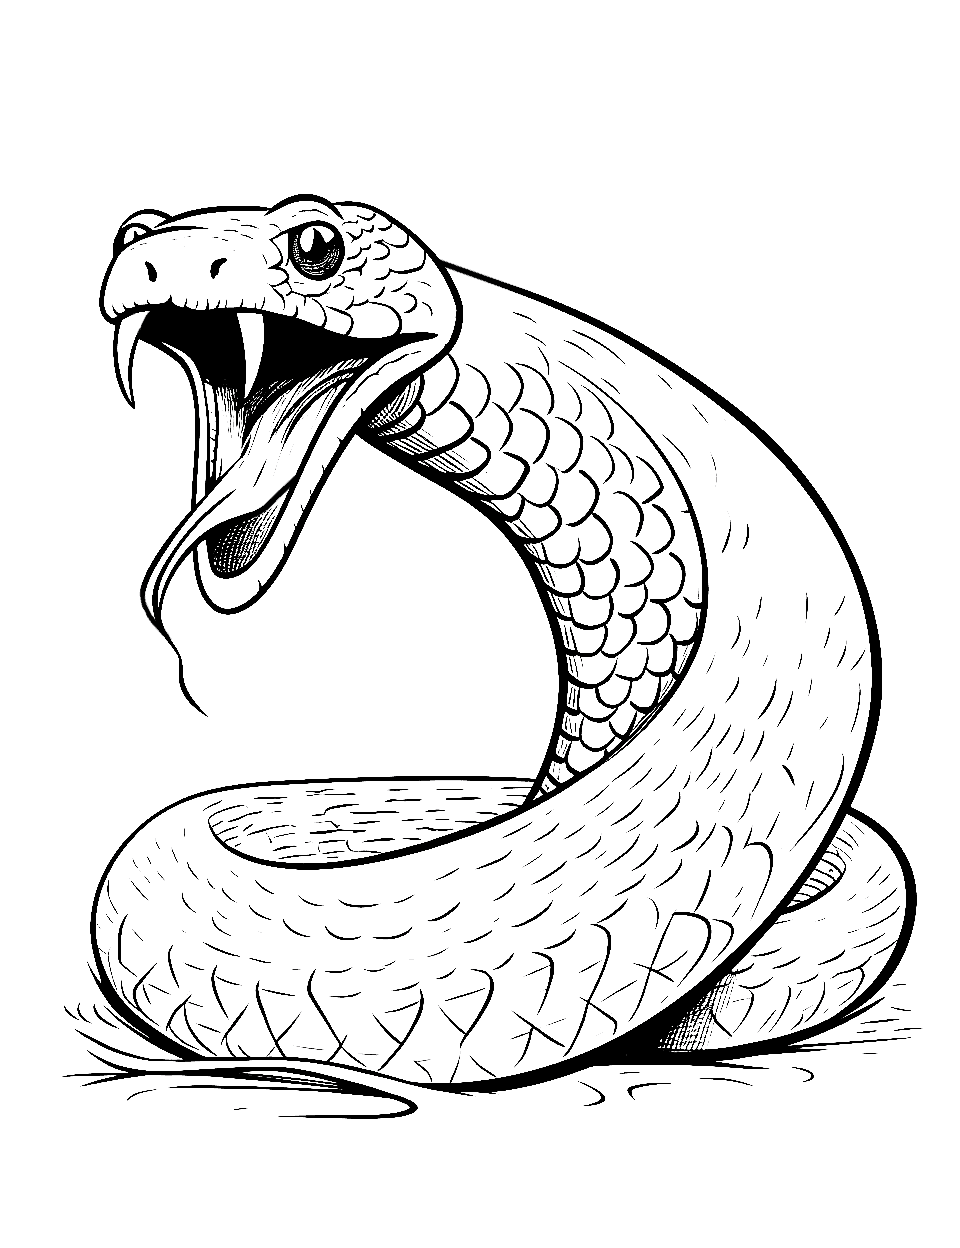 Hiss in Action Coloring Page - A snake with its mouth open, hissing.